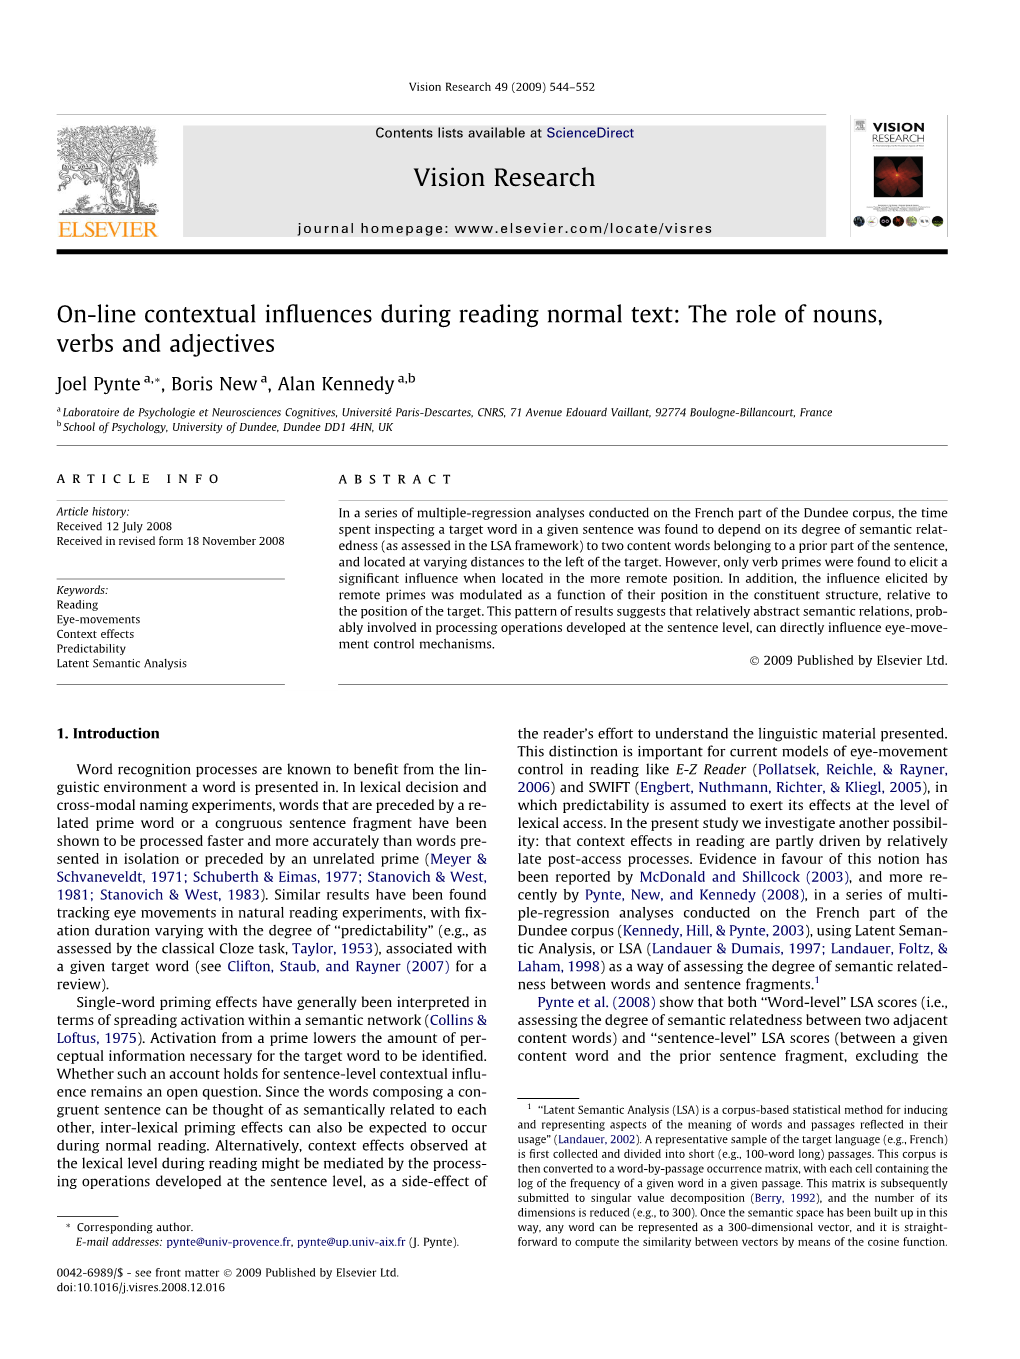 On-Line Contextual Influences During Reading Normal Text: the Role Of